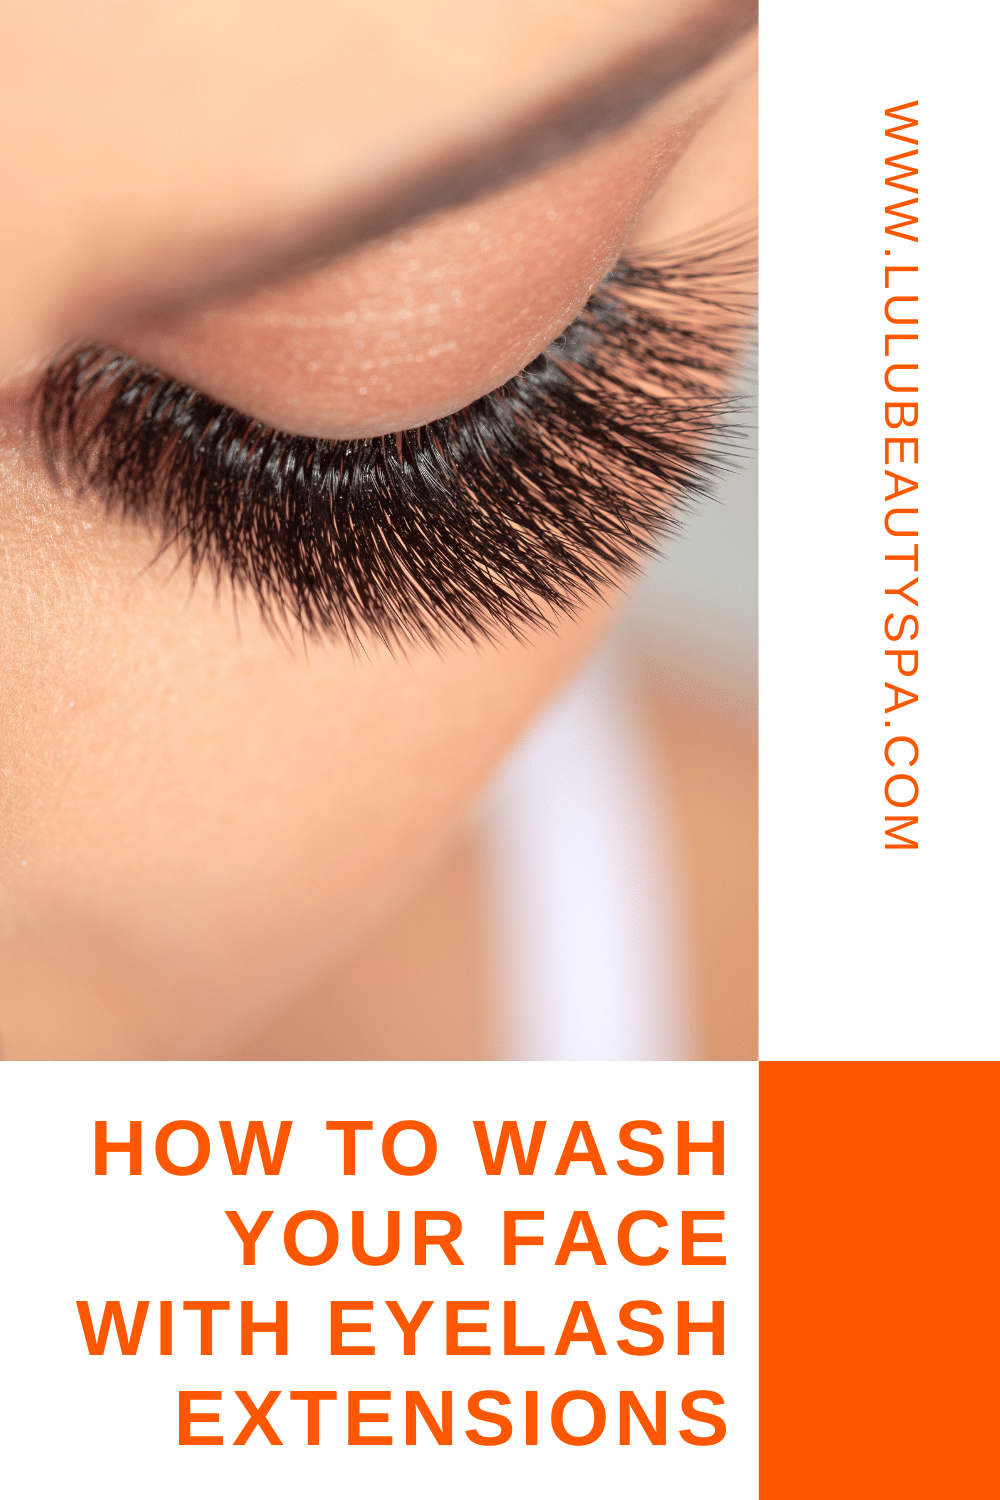 Guide on How to Wash Face with Eyelash Extensions